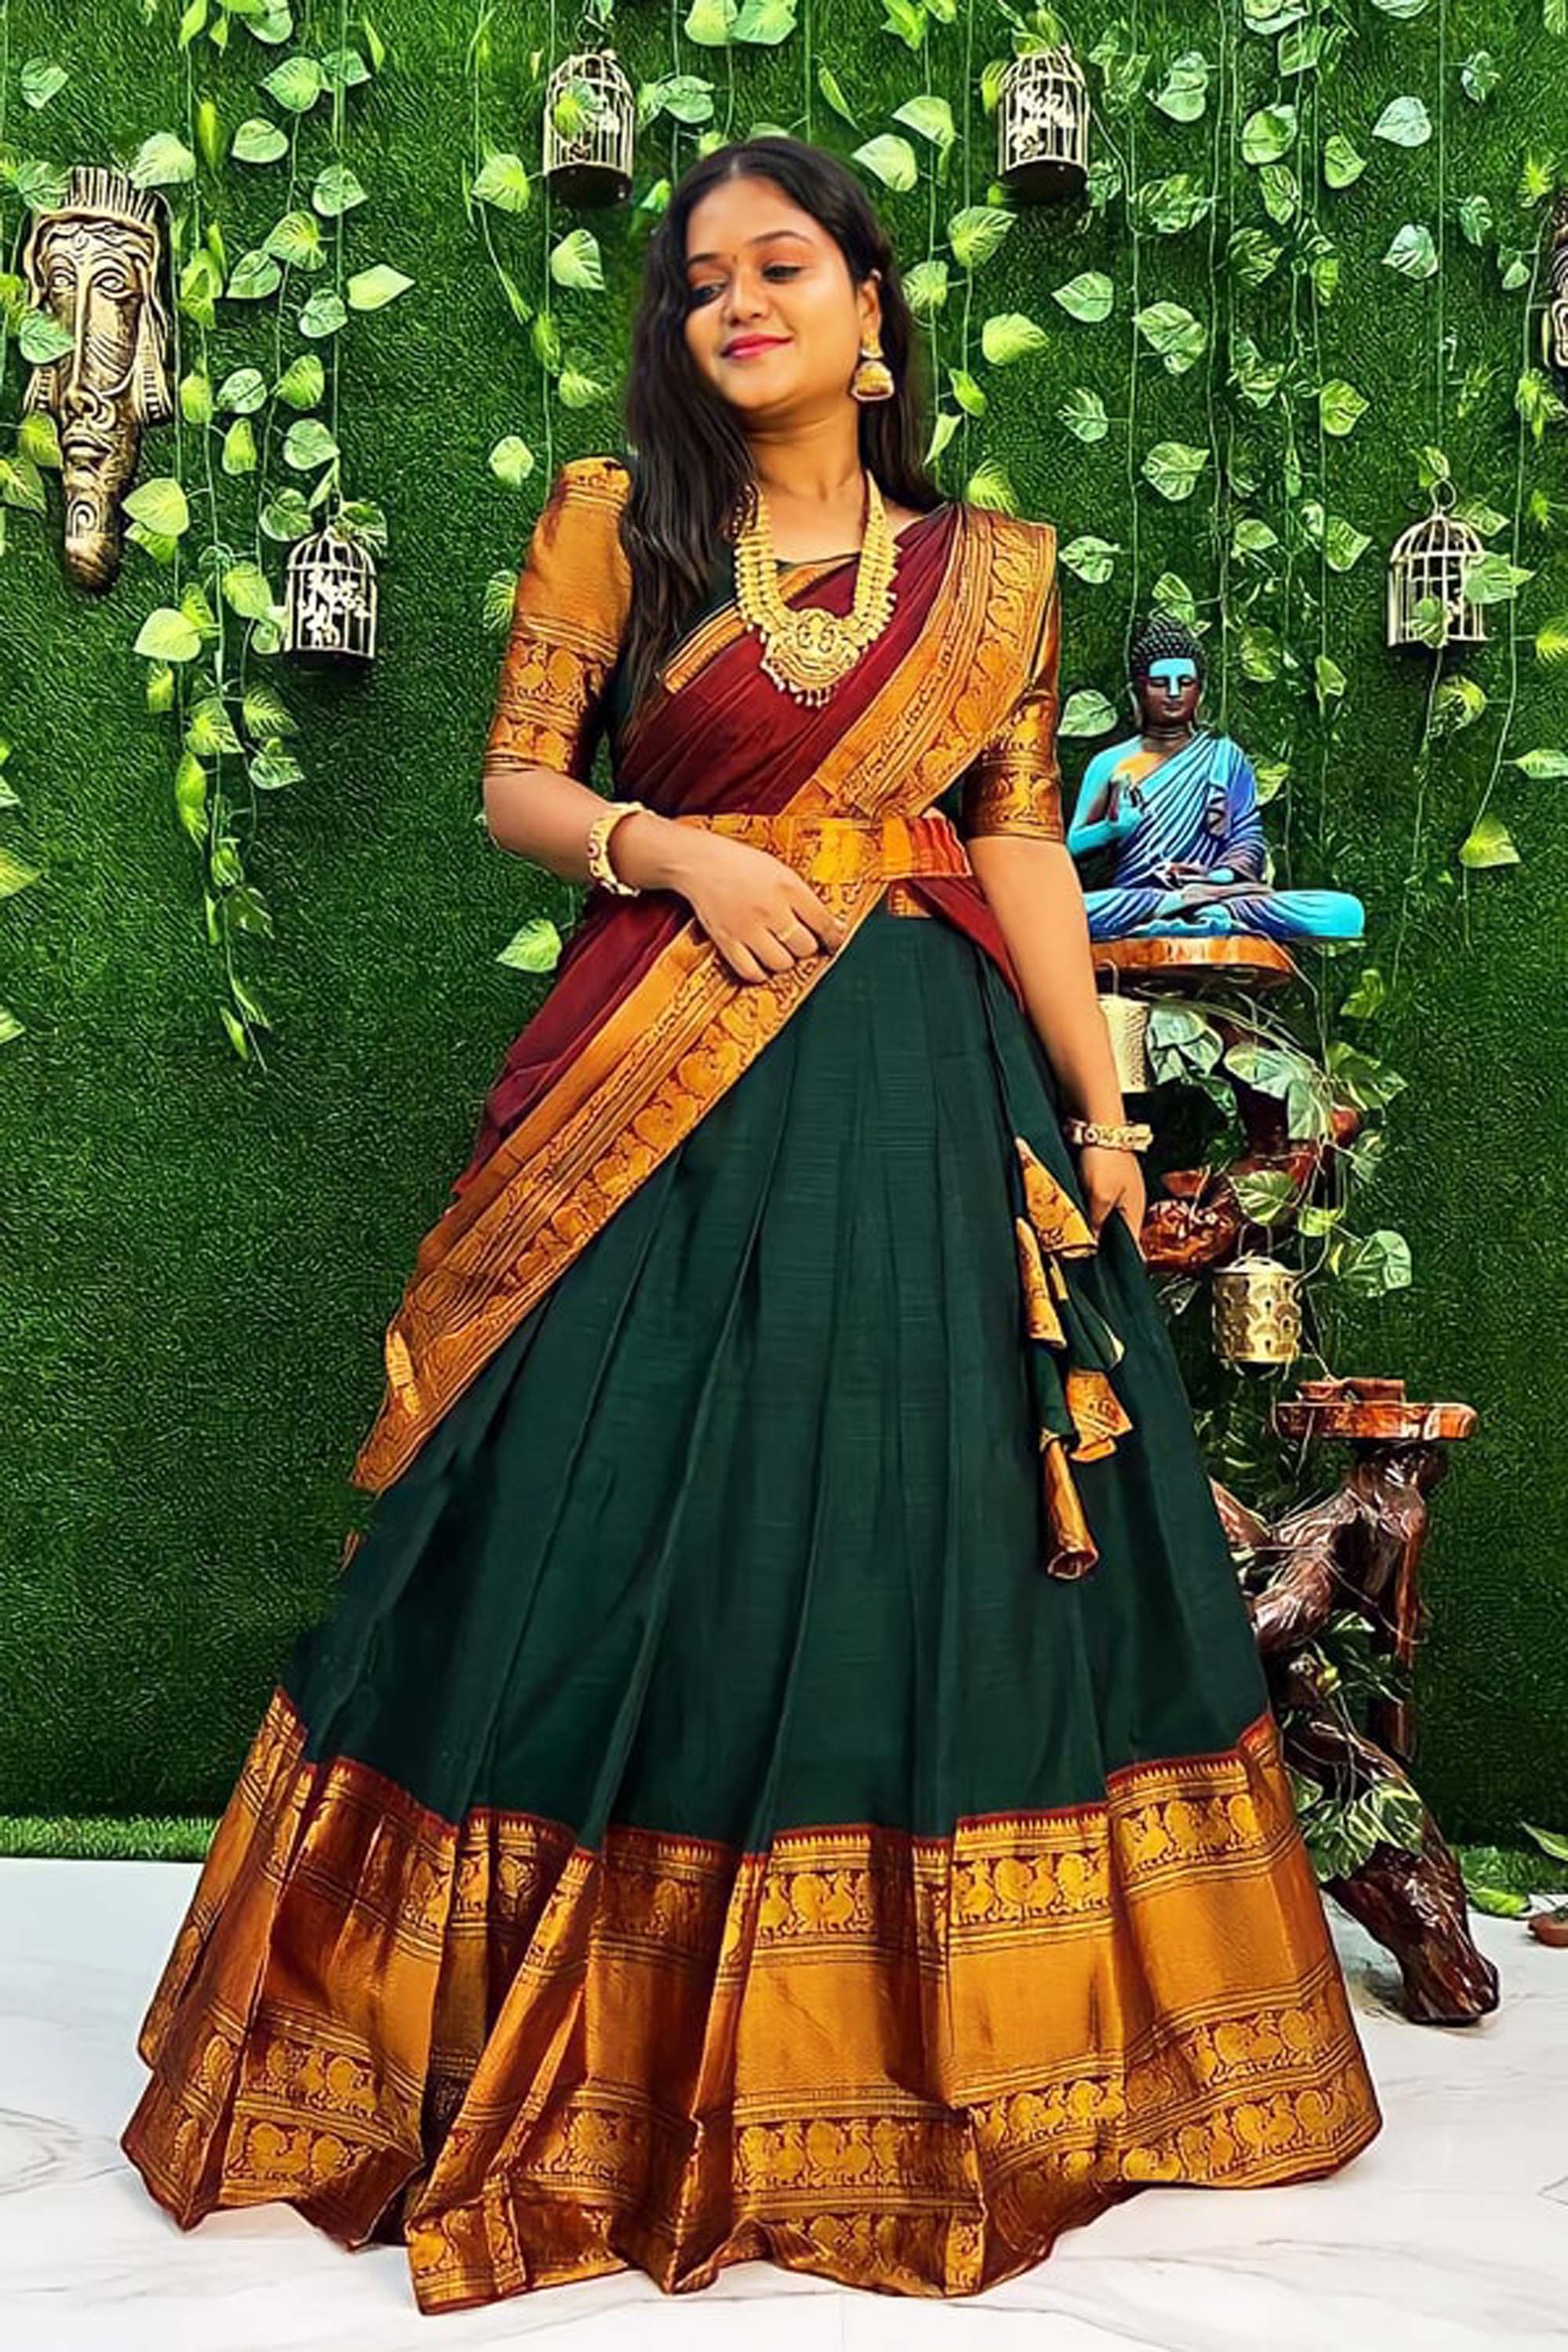 The Most Gorgeous South Indian Lehenga Saree Designs We Spotted! | Wedding  blouse designs, Half saree designs, Wedding saree blouse designs